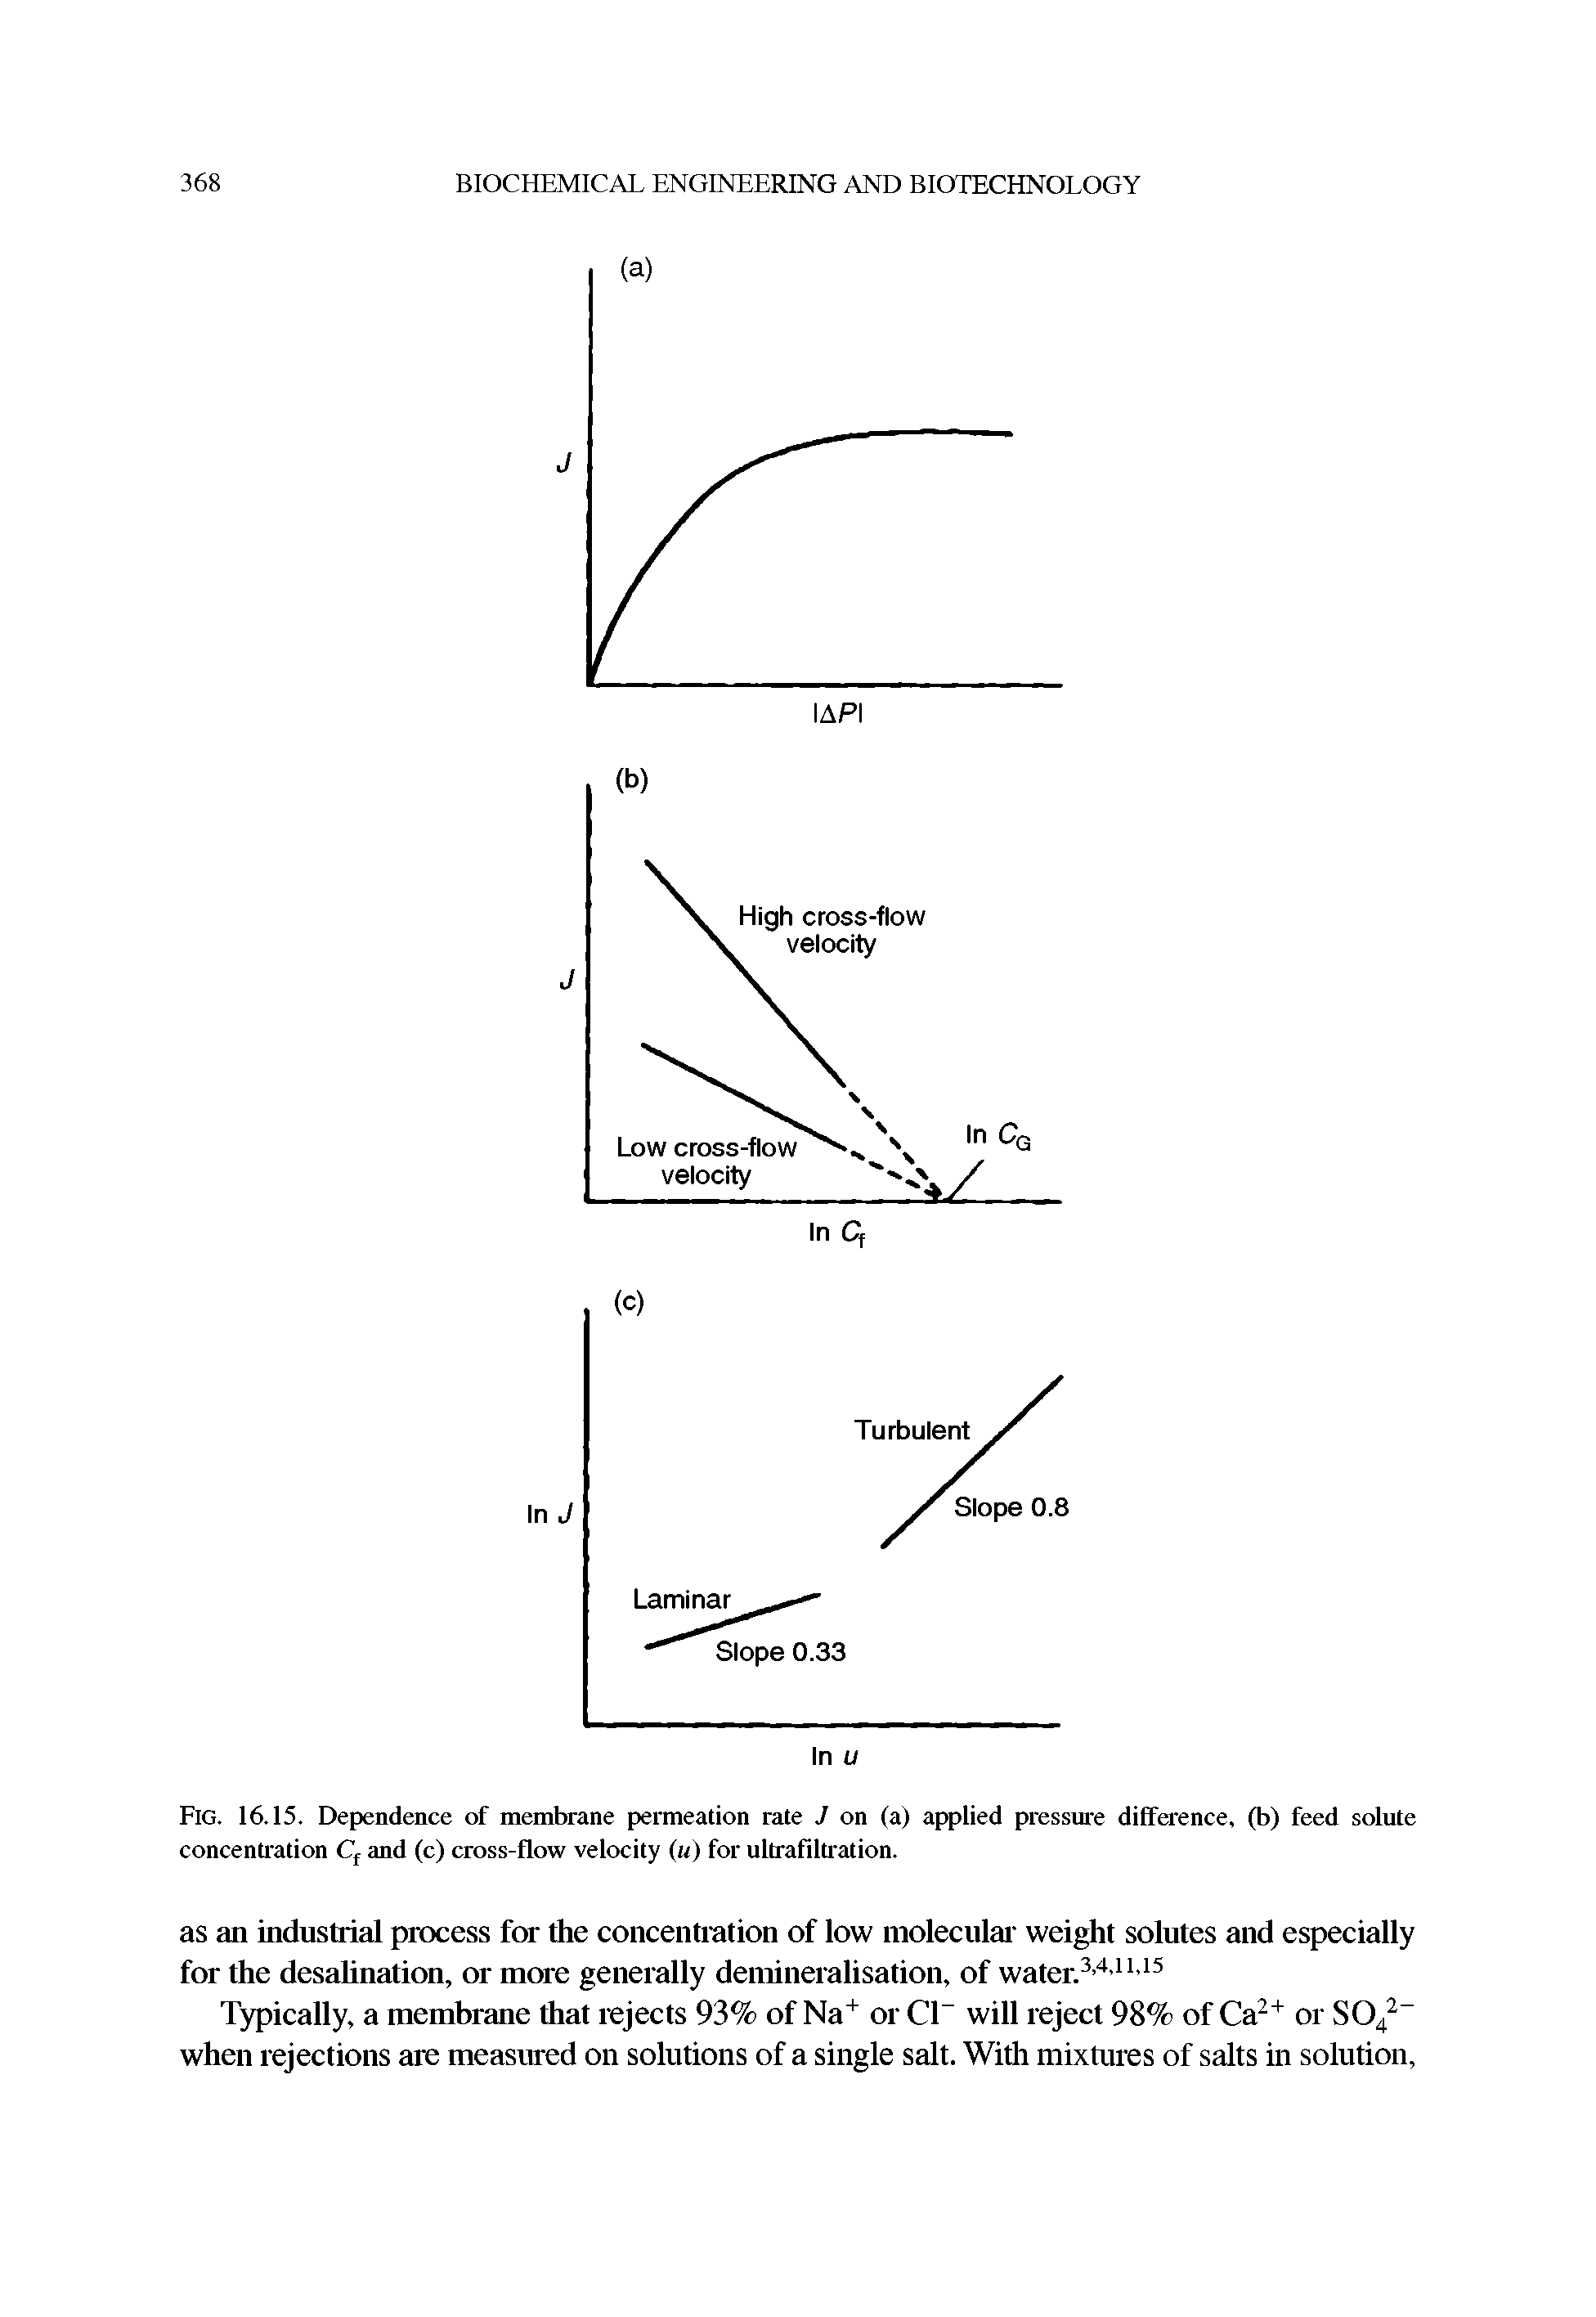 Fig. 16.15. Dependence of membrane permeation rate J on (a) applied pressure difference, (b) feed solute concentration Cf and (c) cross-flow velocity ( ) for ultrafiltration.